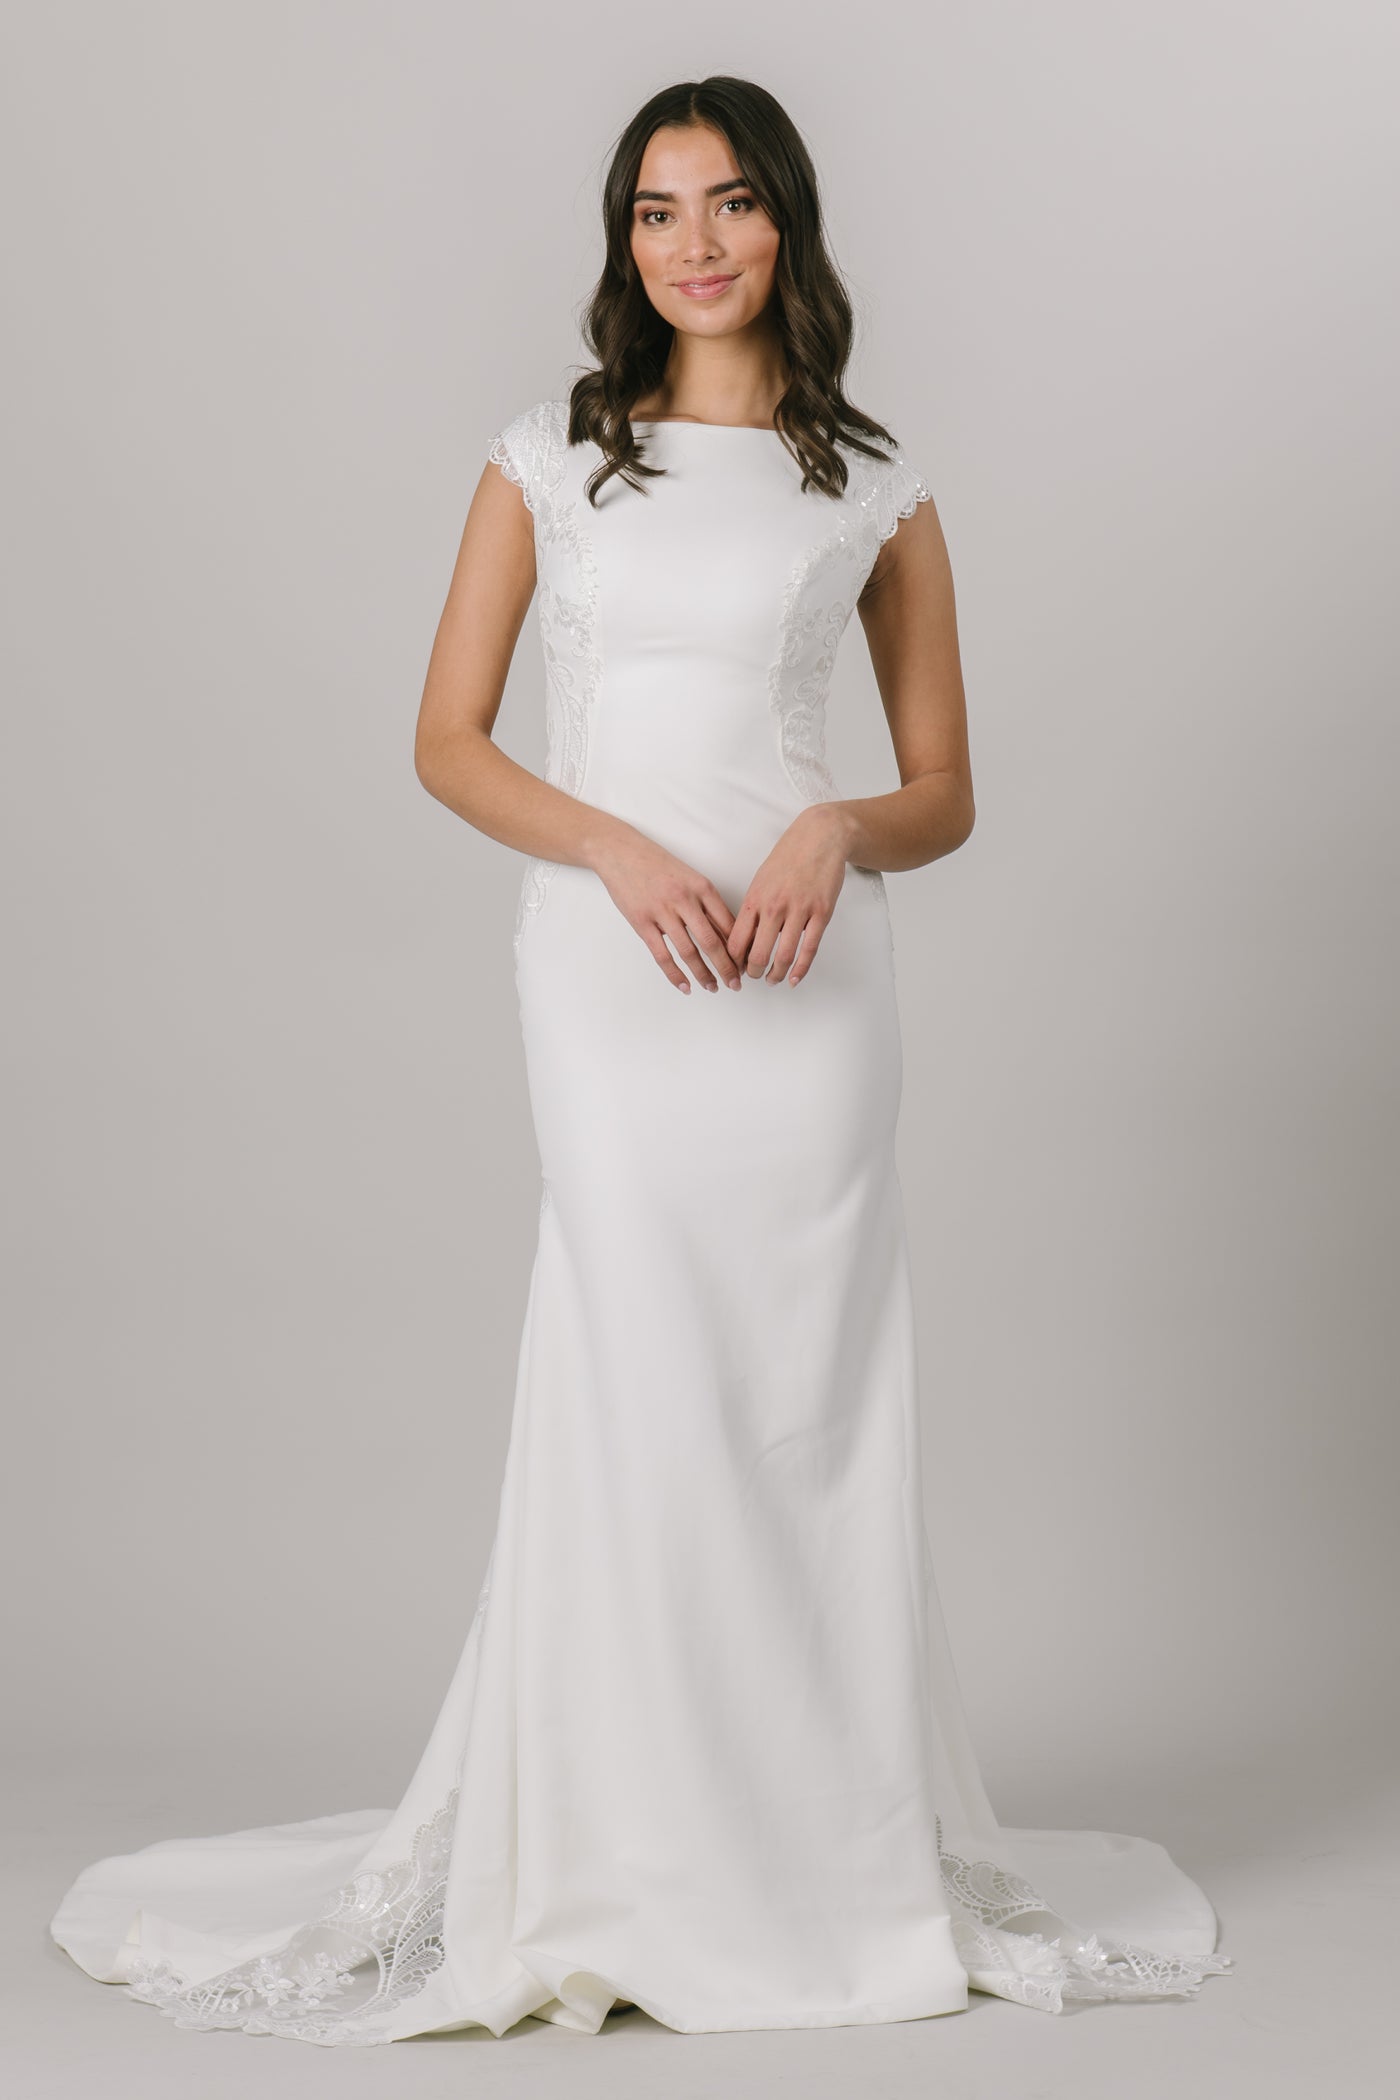 Elegant and simple, this brand new, modest wedding dress features a fitted silhouette and a beautiful lace that trails down either side of the dress. 